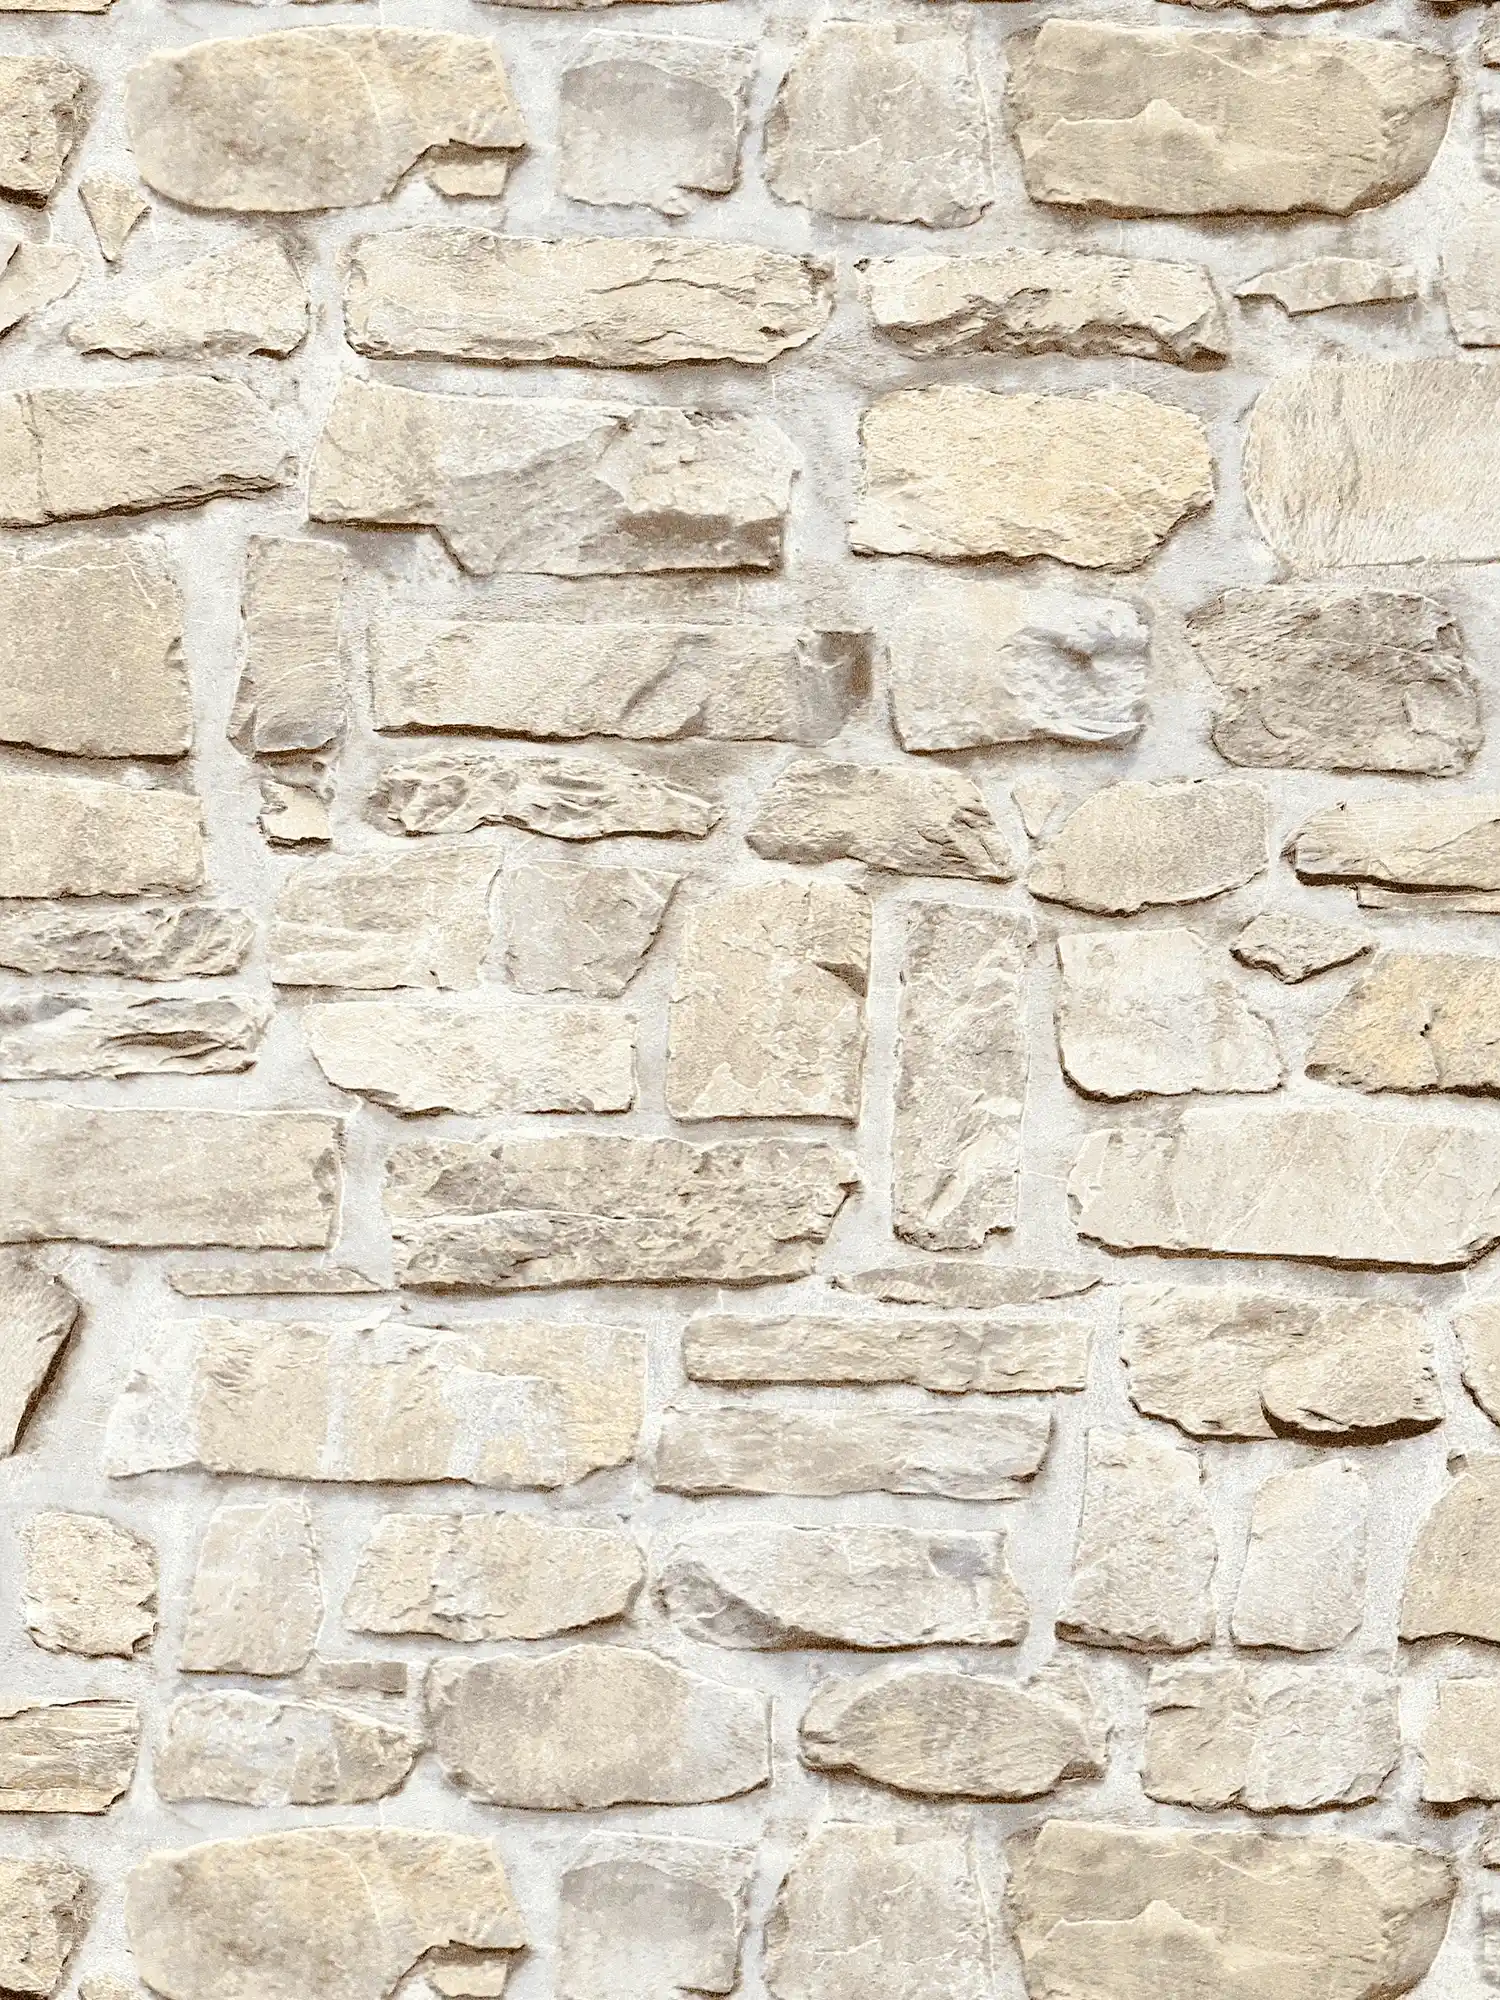         Stone wallpaper with natural stone masonry in country style - beige, yellow
    